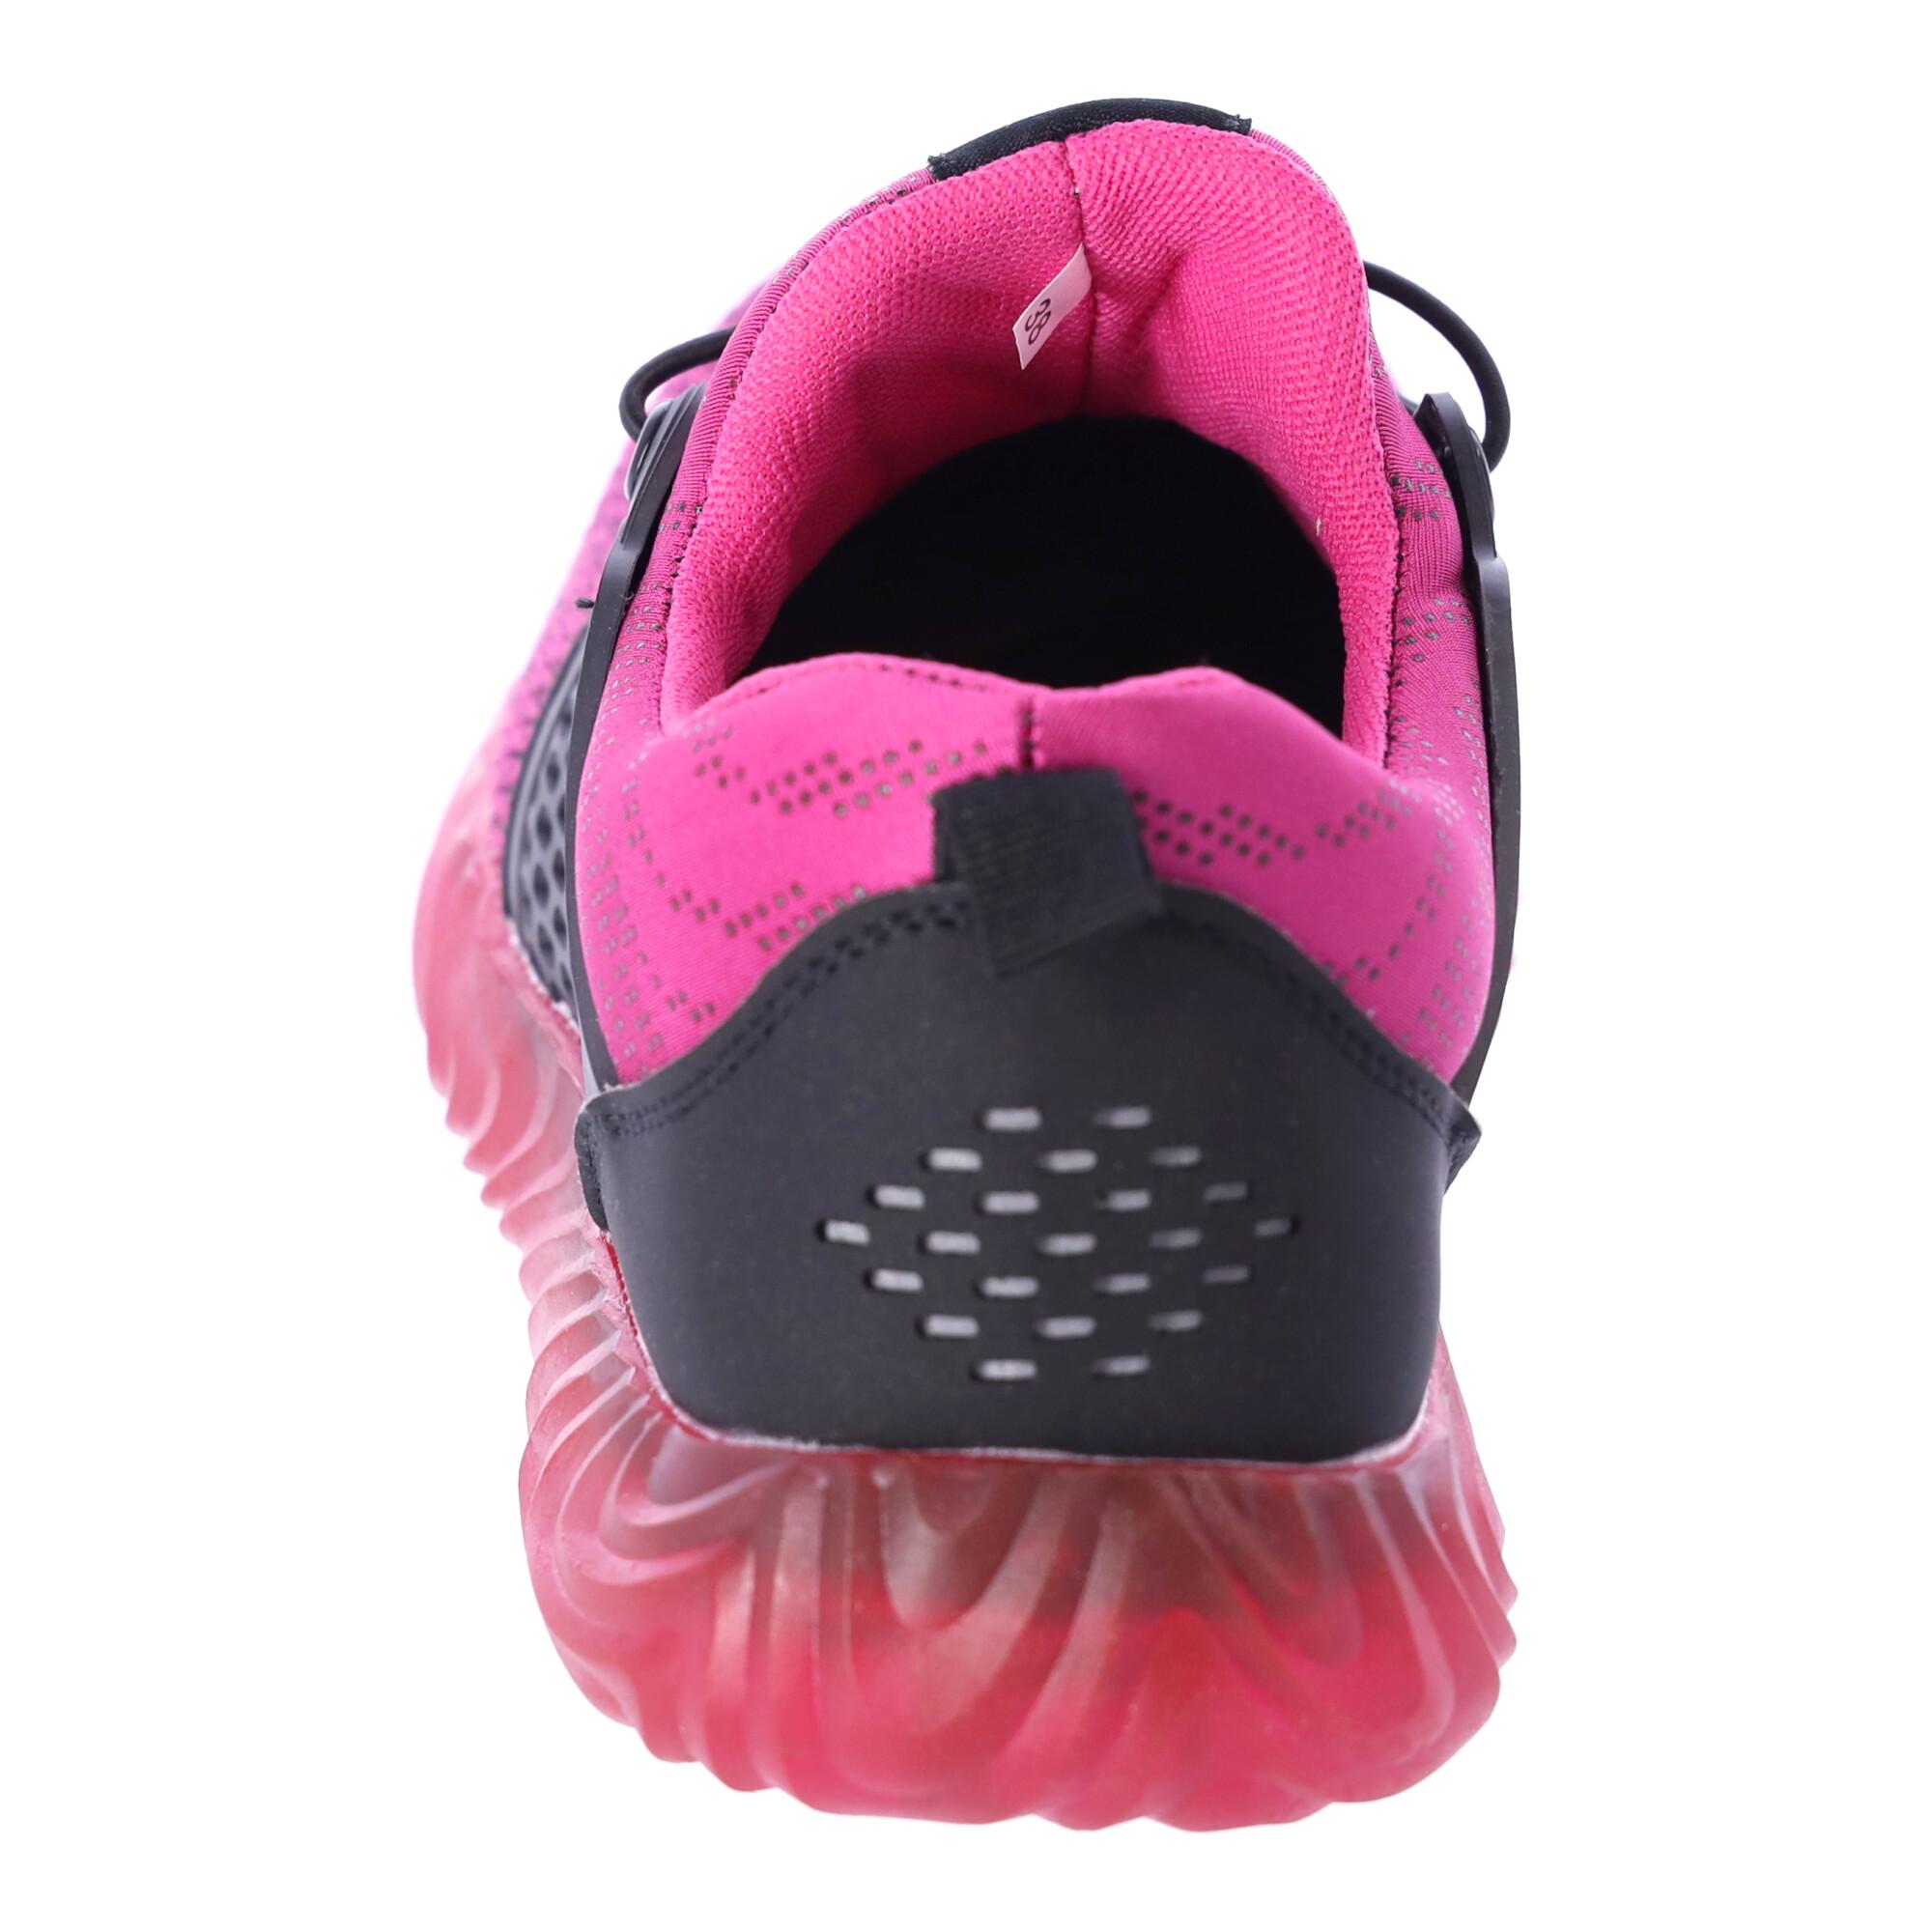 Work safety shoes "36" - pink